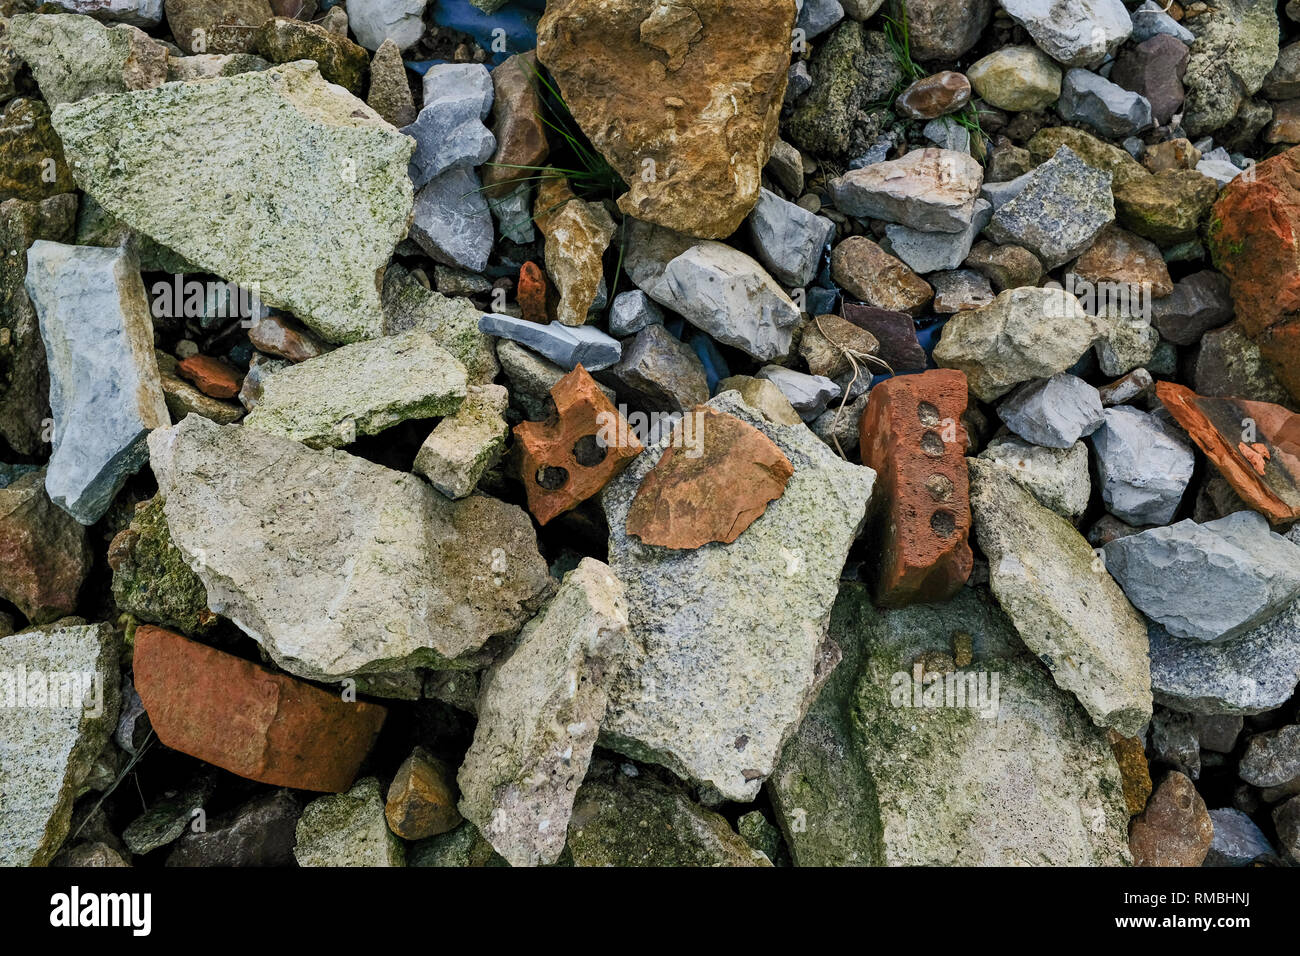 a small pile of mixed rubble including rocks, bricks and pebbles Stock Photo